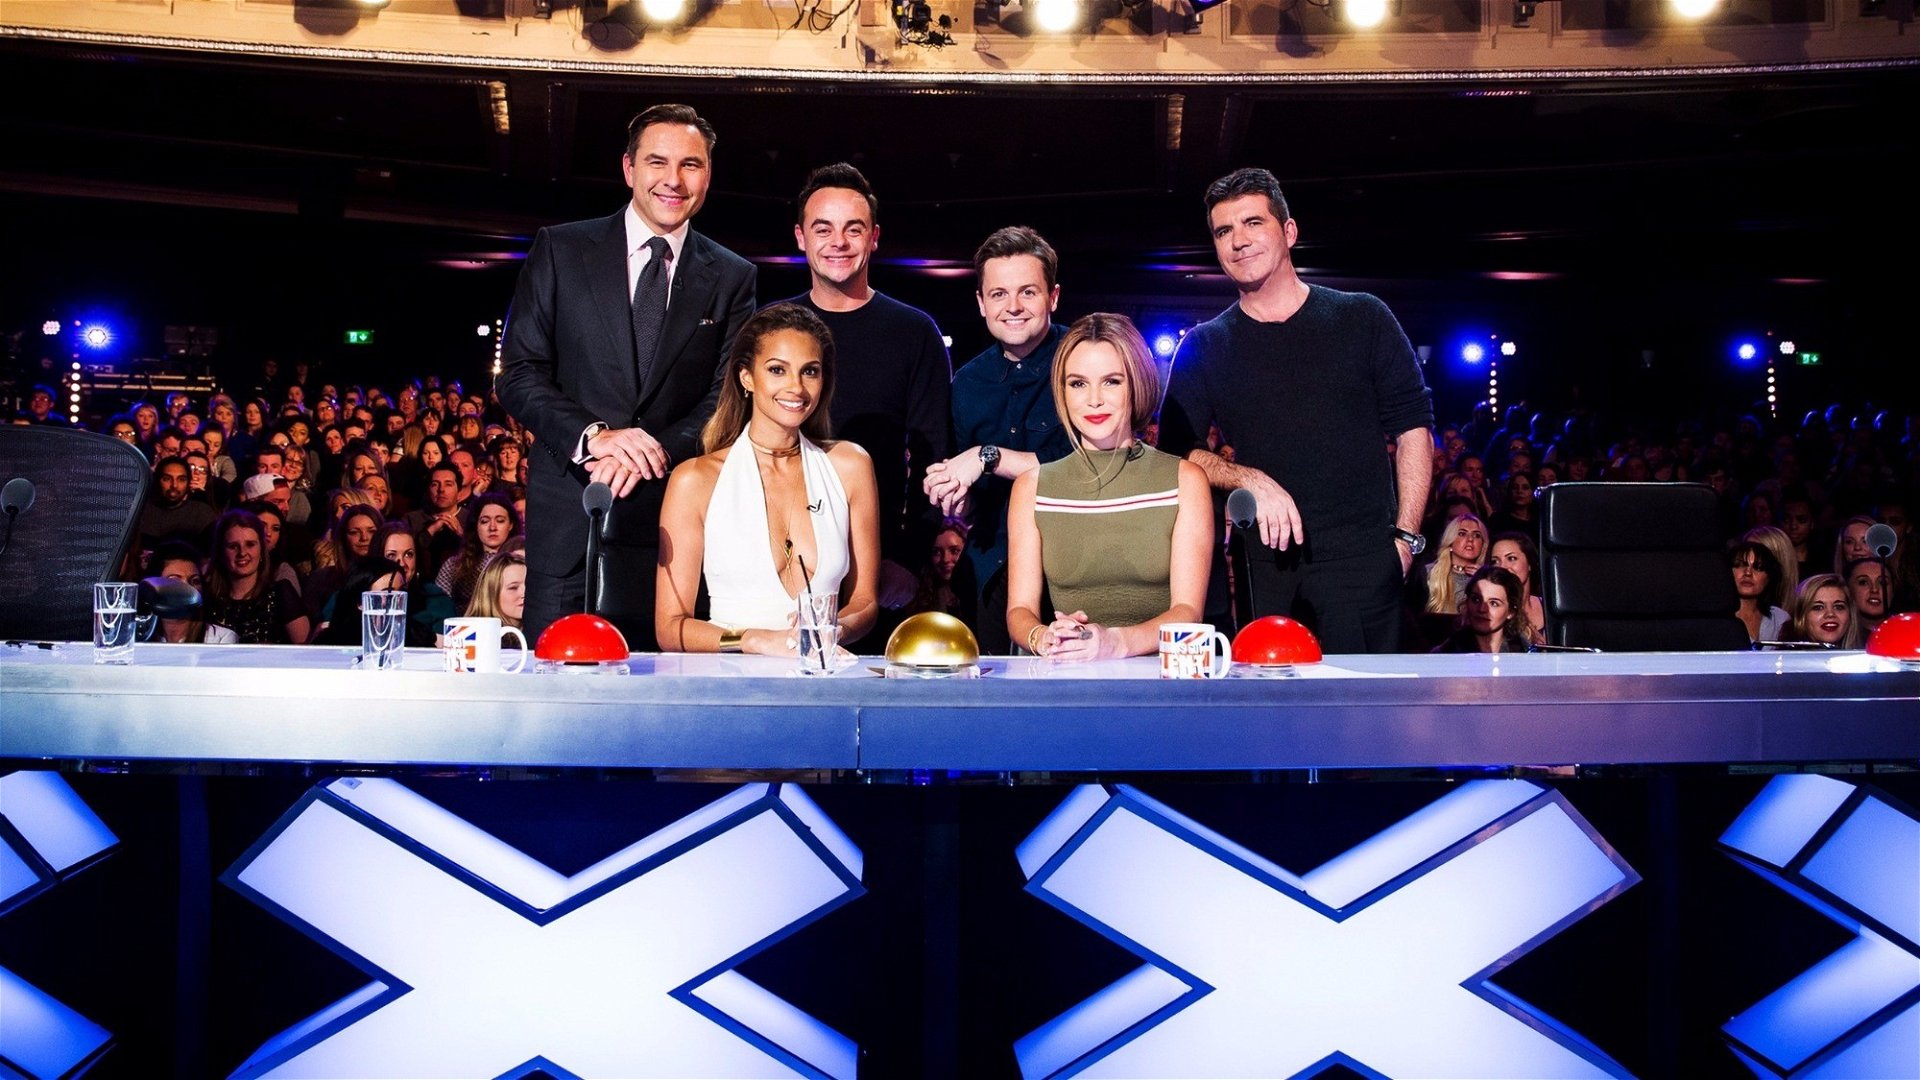 ITV1's Britain's Got Talent is back with auditions taking place in autumn